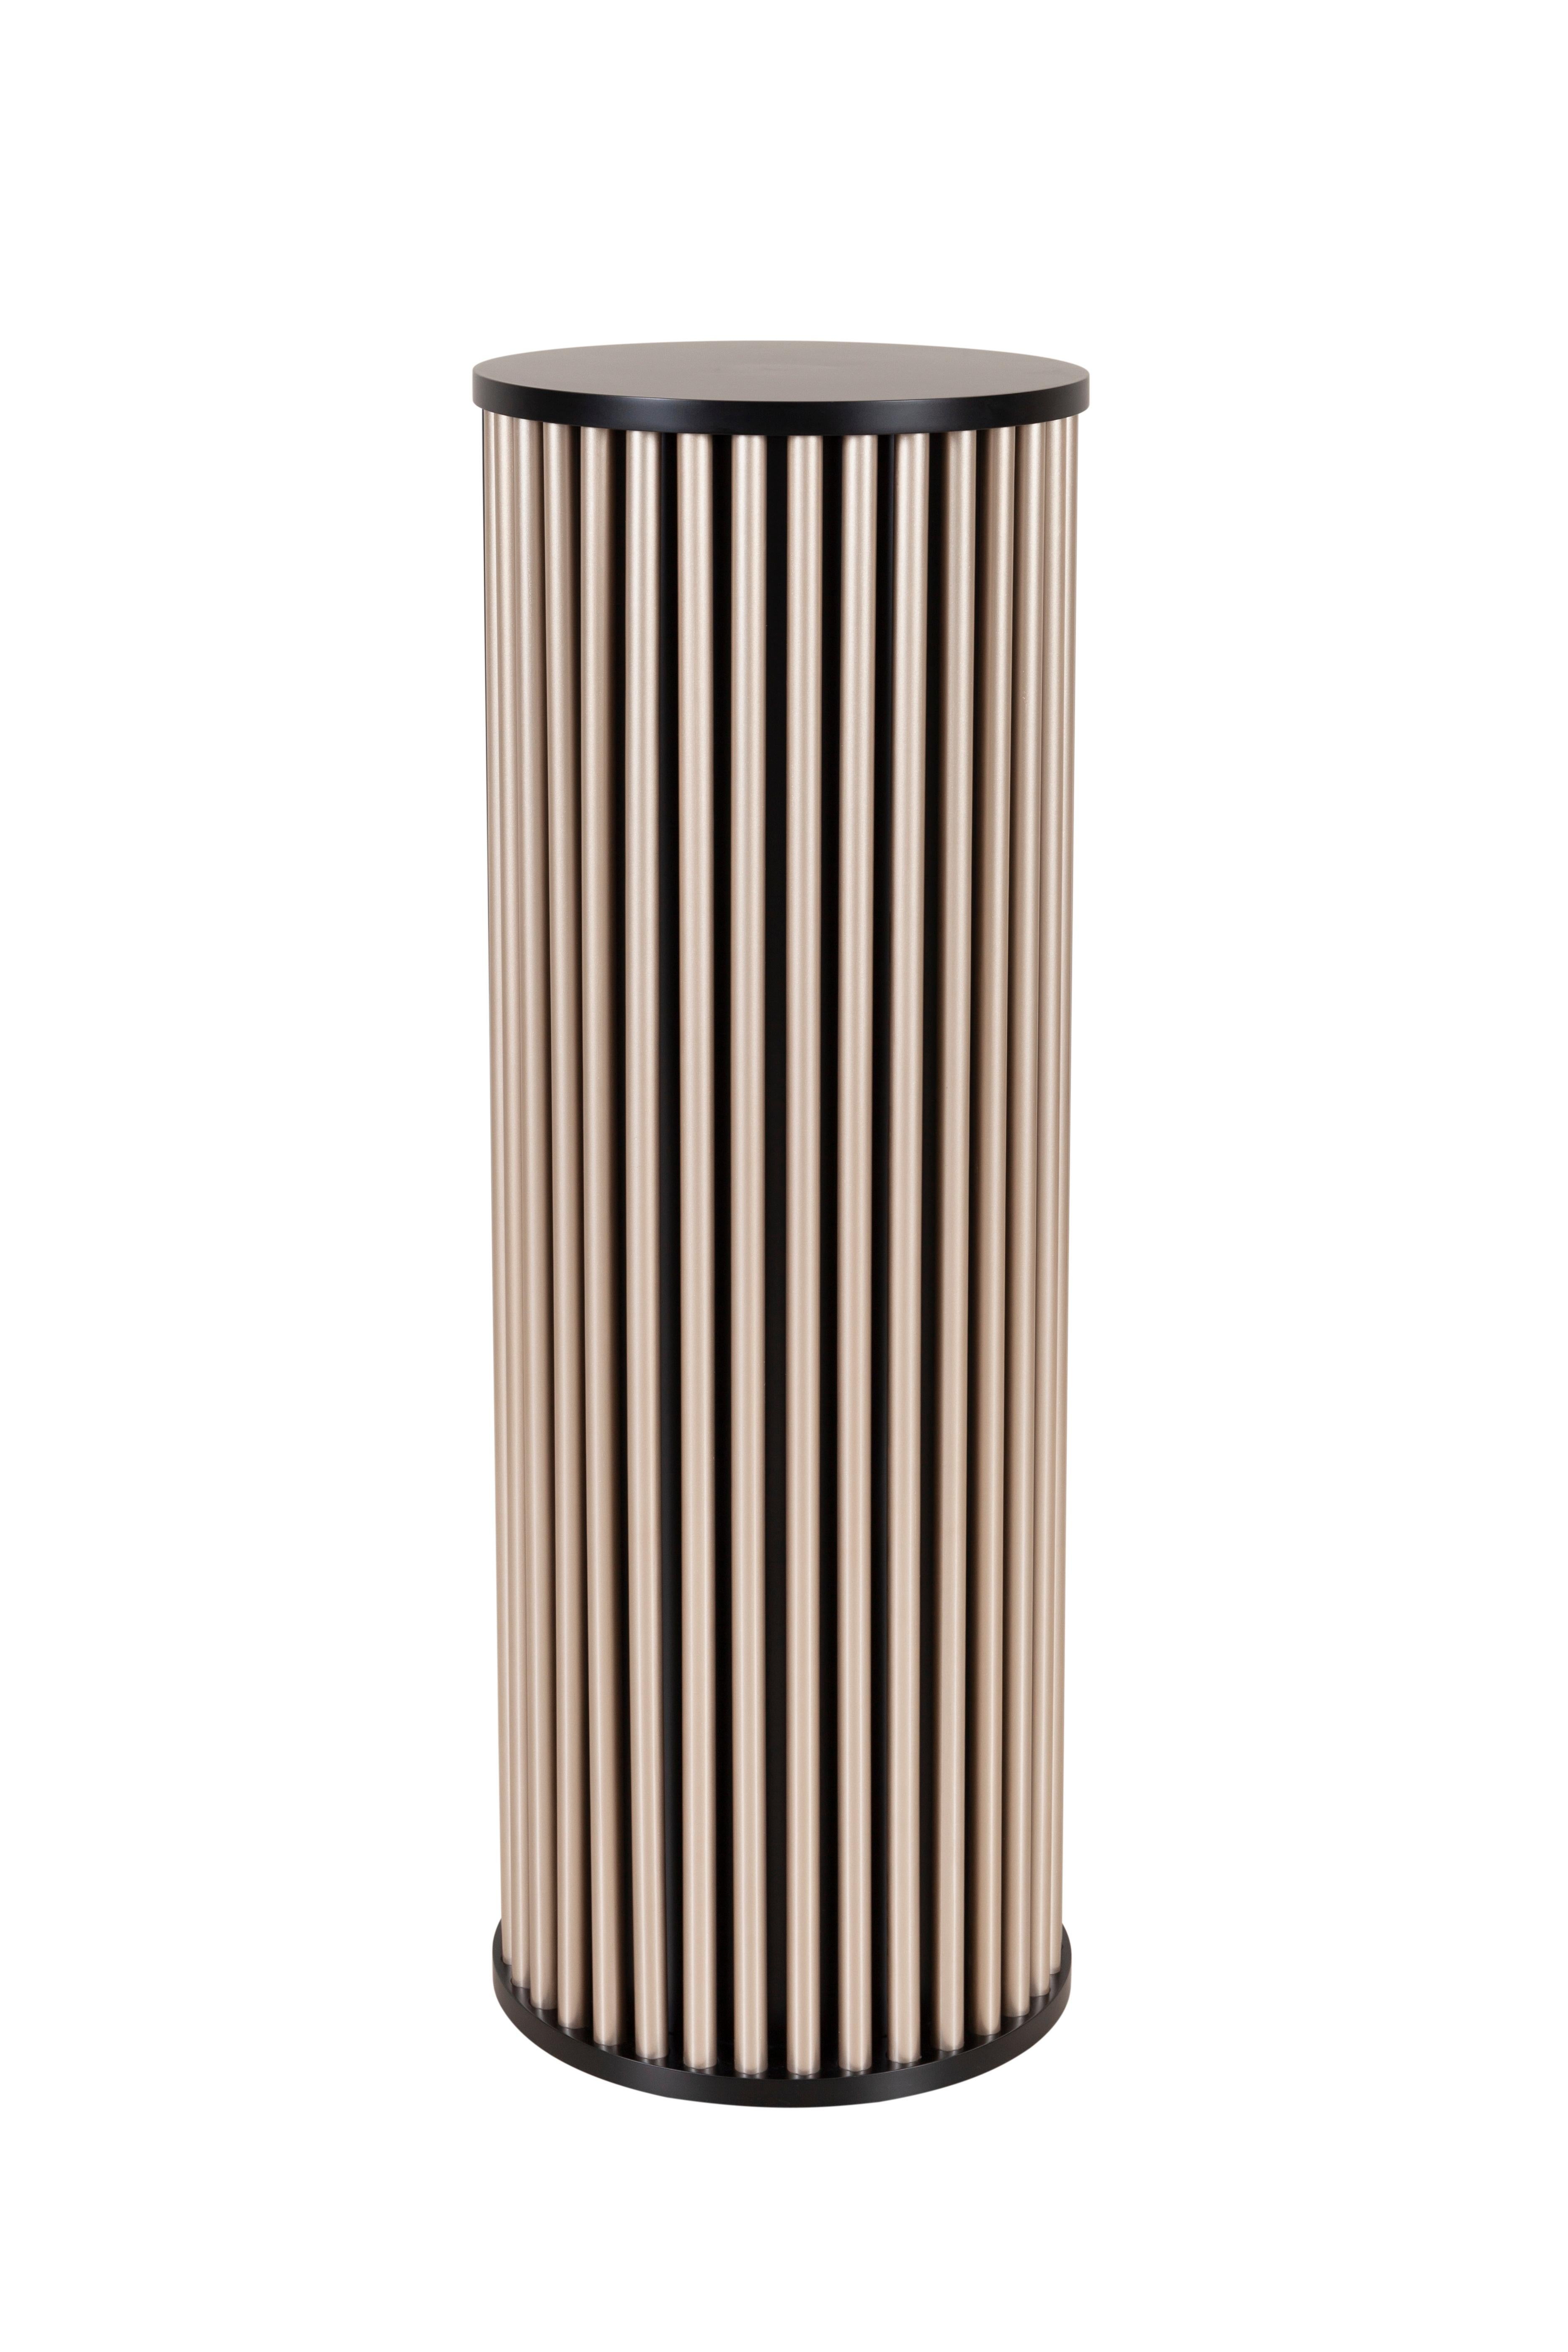 Hand-Crafted Modern Black Flute Pedestal Sculpture Column Handmade in Portugal by Greenapple For Sale